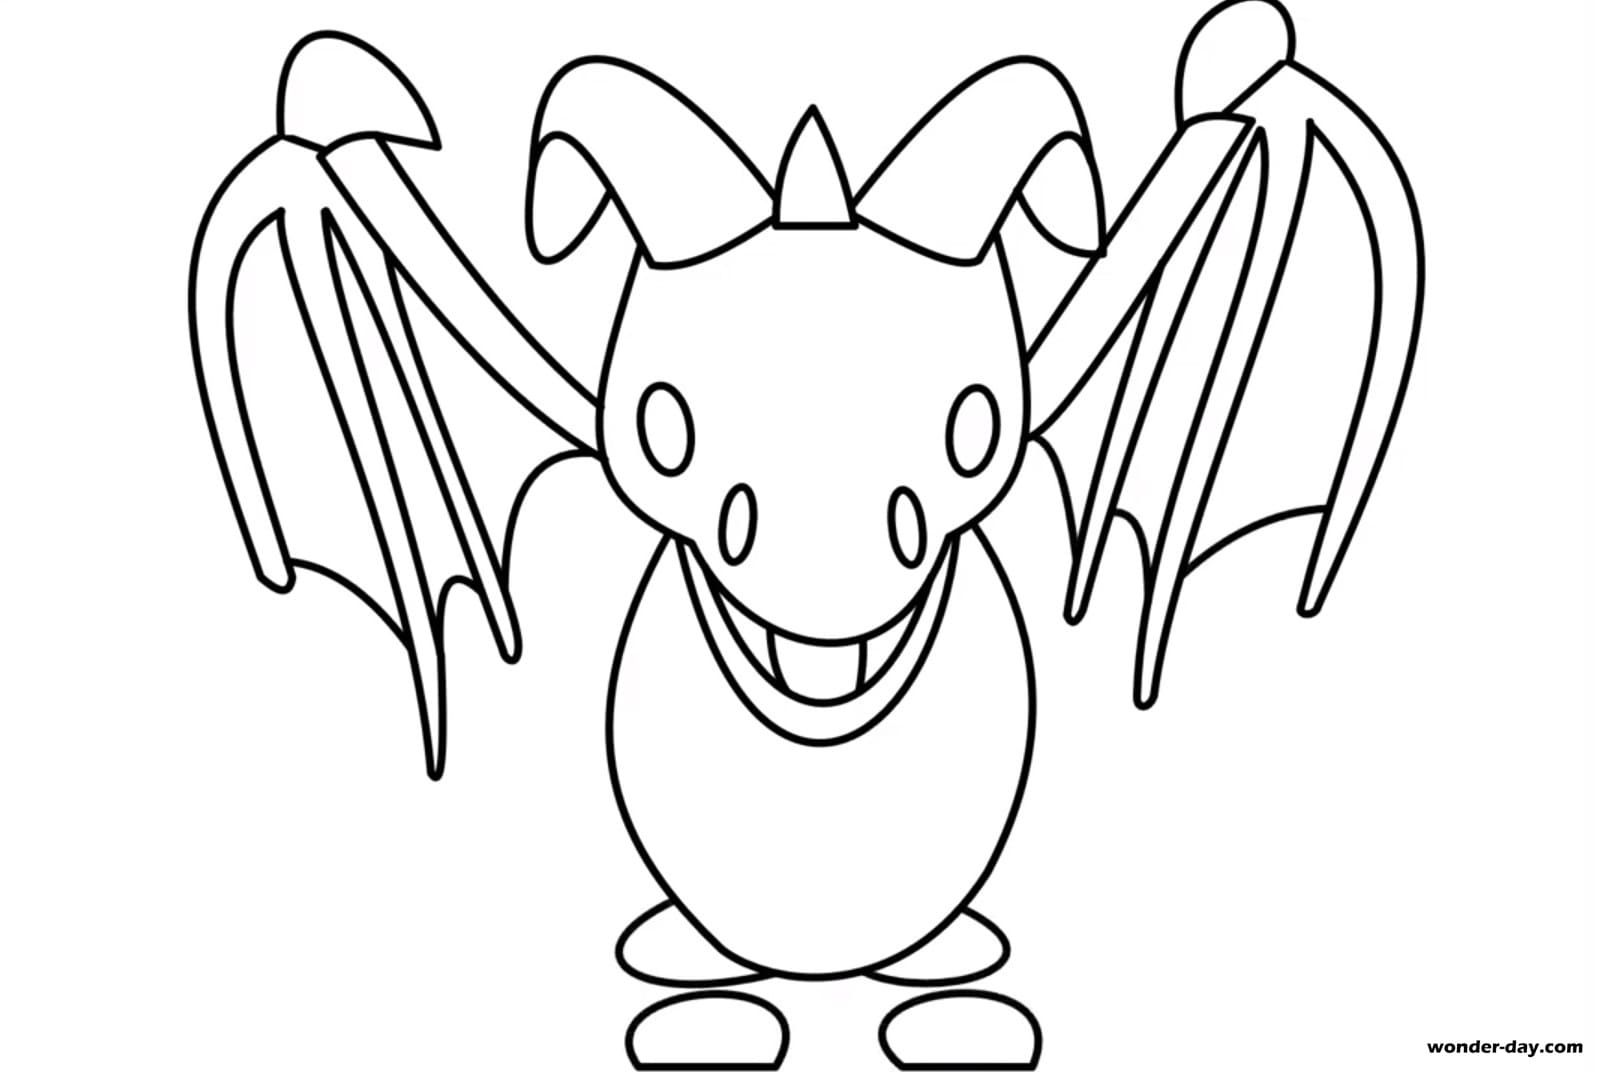 Coloring Pages Adopt Me Print For Free Wonder Day Com Pets Drawing Animal Coloring Pages Dragon Coloring Page Coloring Home - adopt me pets roblox drawing